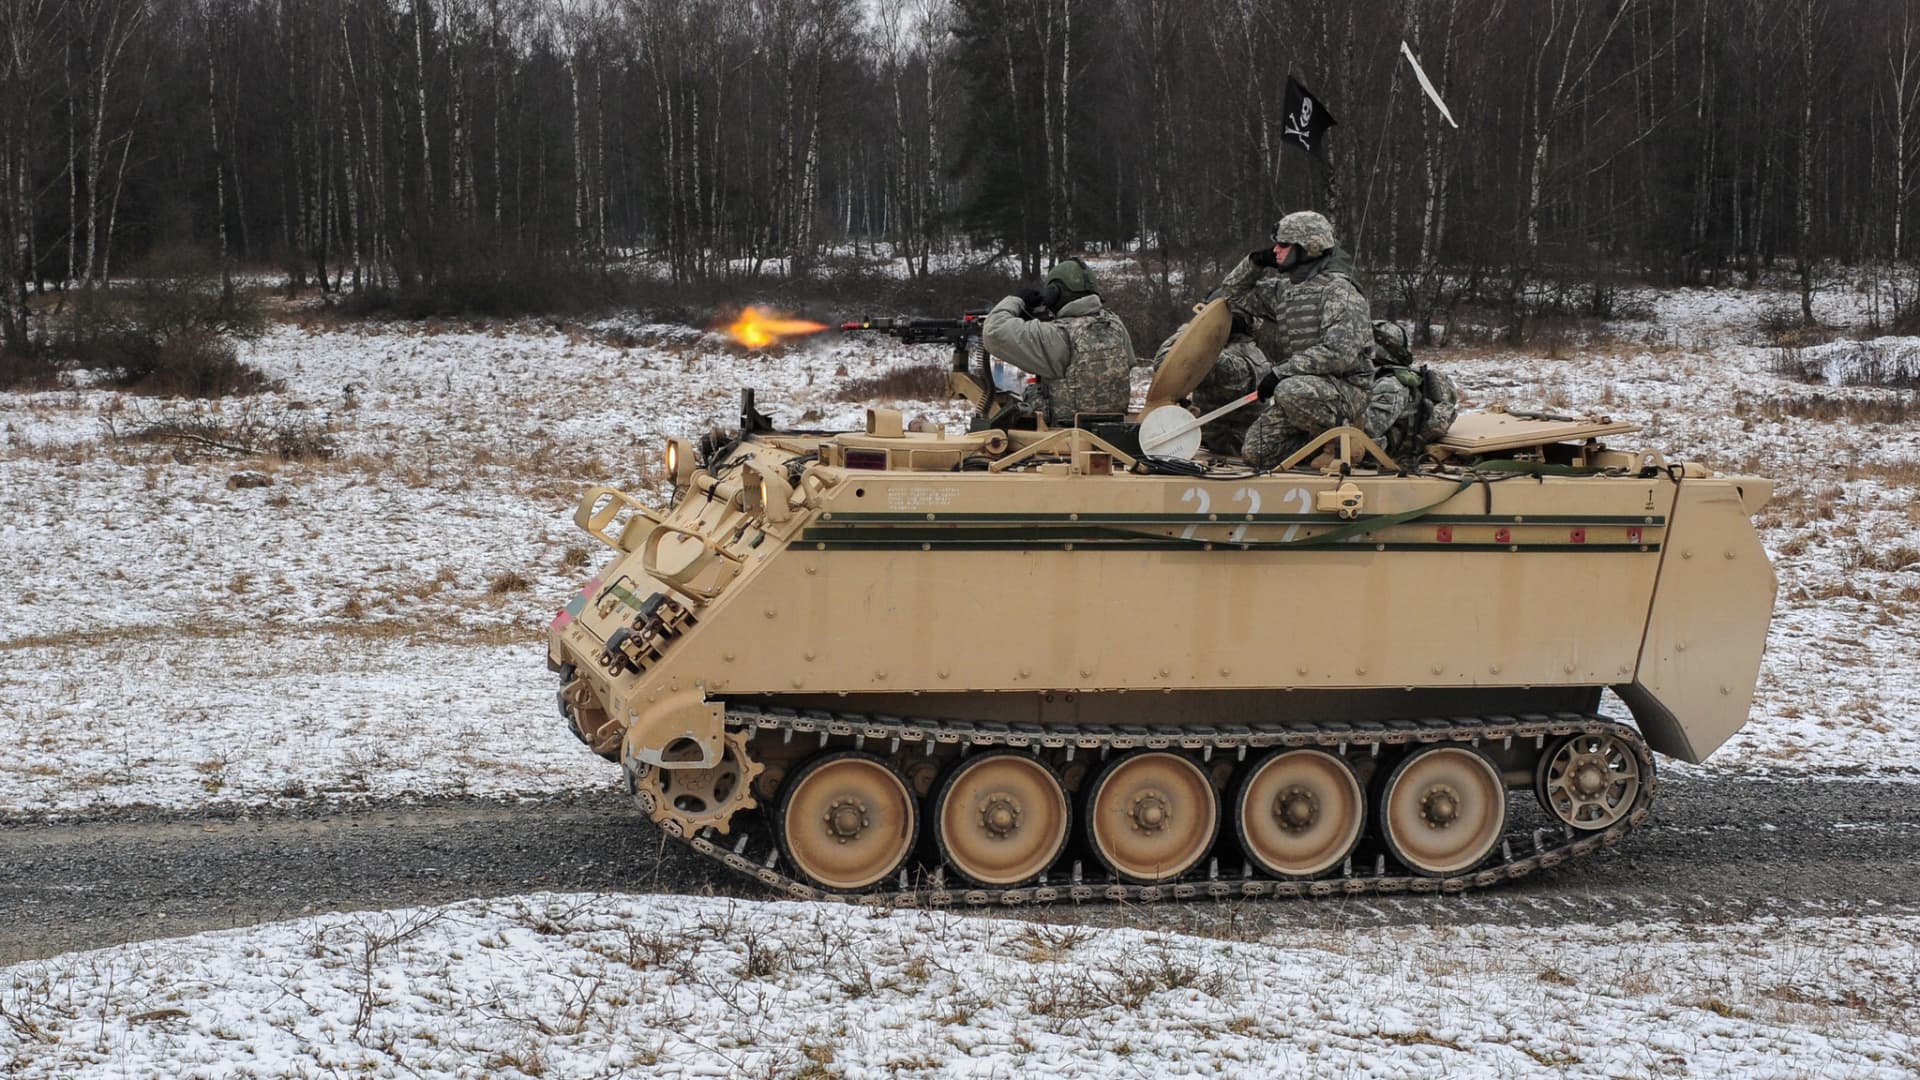 U.S. Army Soldiers, assigned to Bravo Company, 1st Battalion, 4th Infantry Regiment, engage a target from a M113A2 armored vehicle during squad maneuver training at Grafenwoehr Training Area on Jan. 14, 2013.